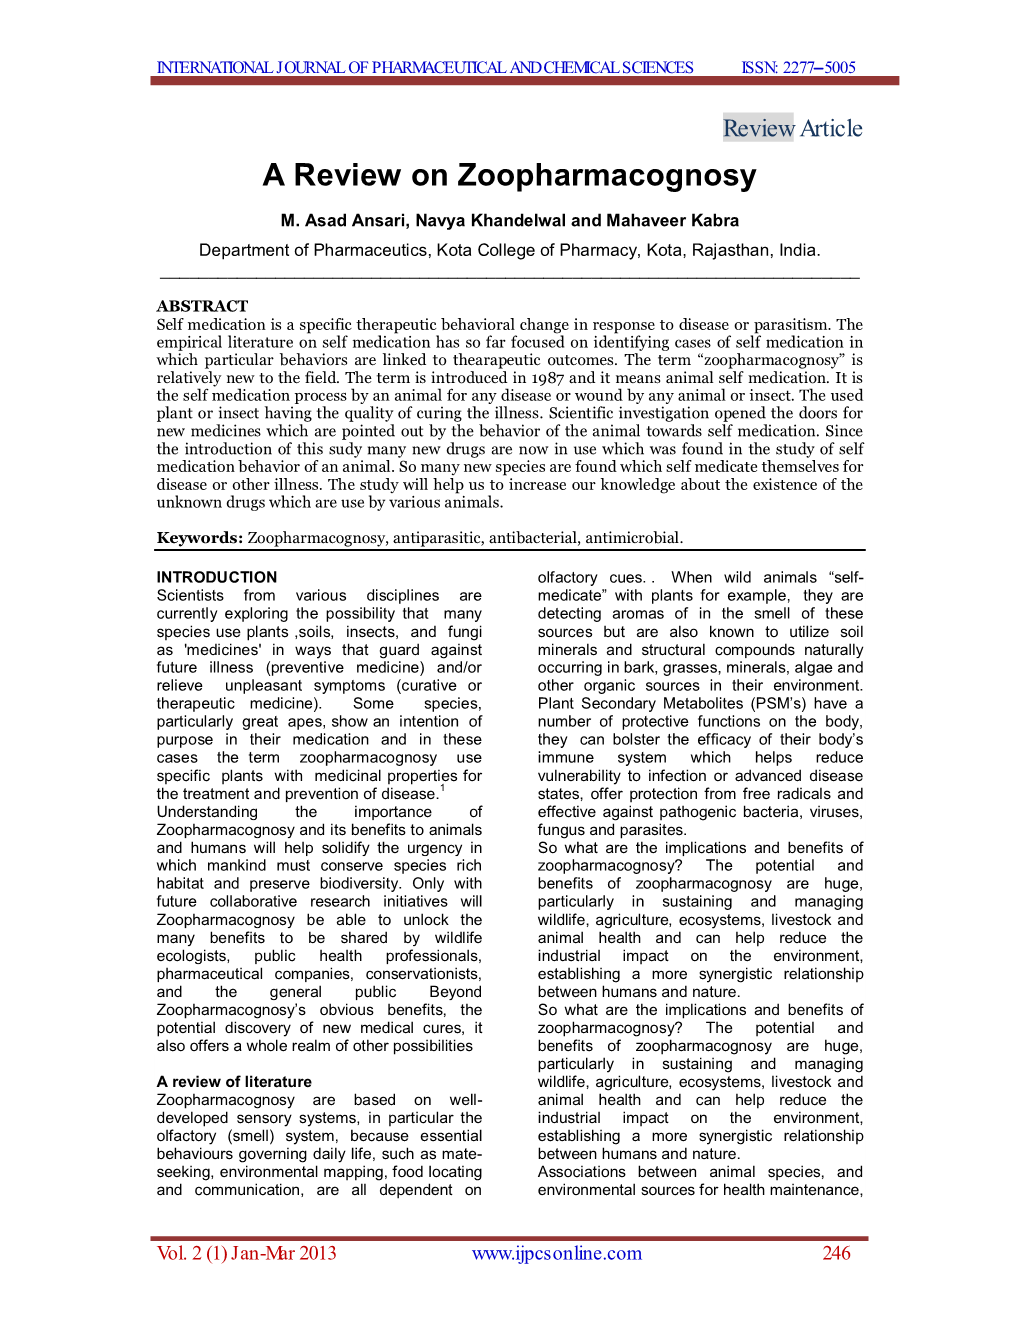 A Review on Zoopharmacognosy